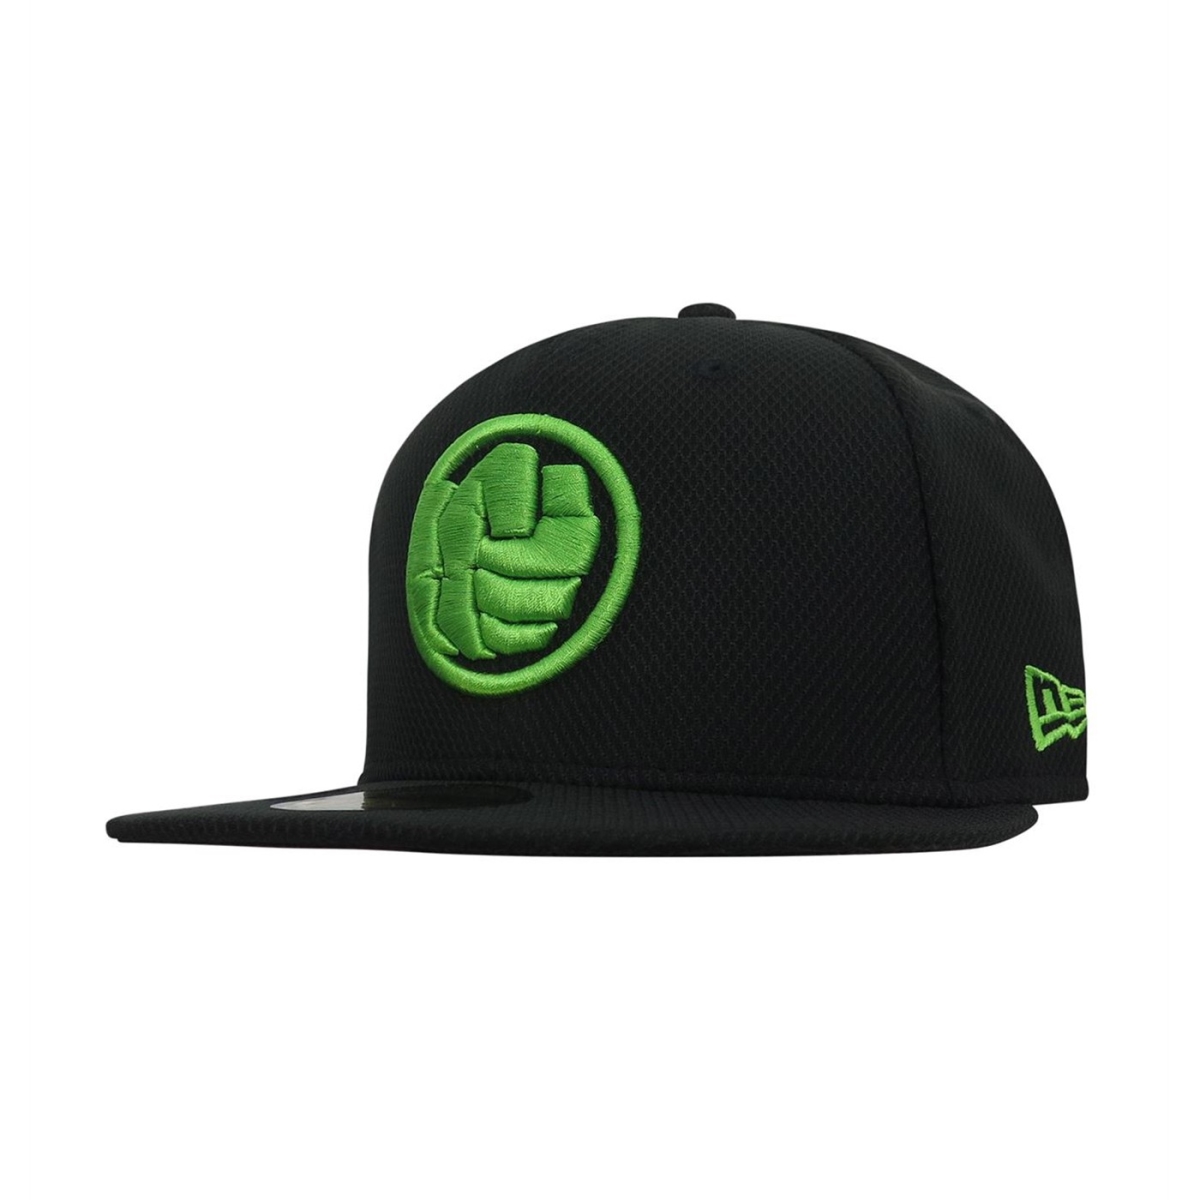 Picture of Incredible Hulk hathulkfistsym5950-718-7 1-8 Fitted Incredible Hulk Hulk Fist Symbol 59Fifty Fitted Hat - Size 7.125